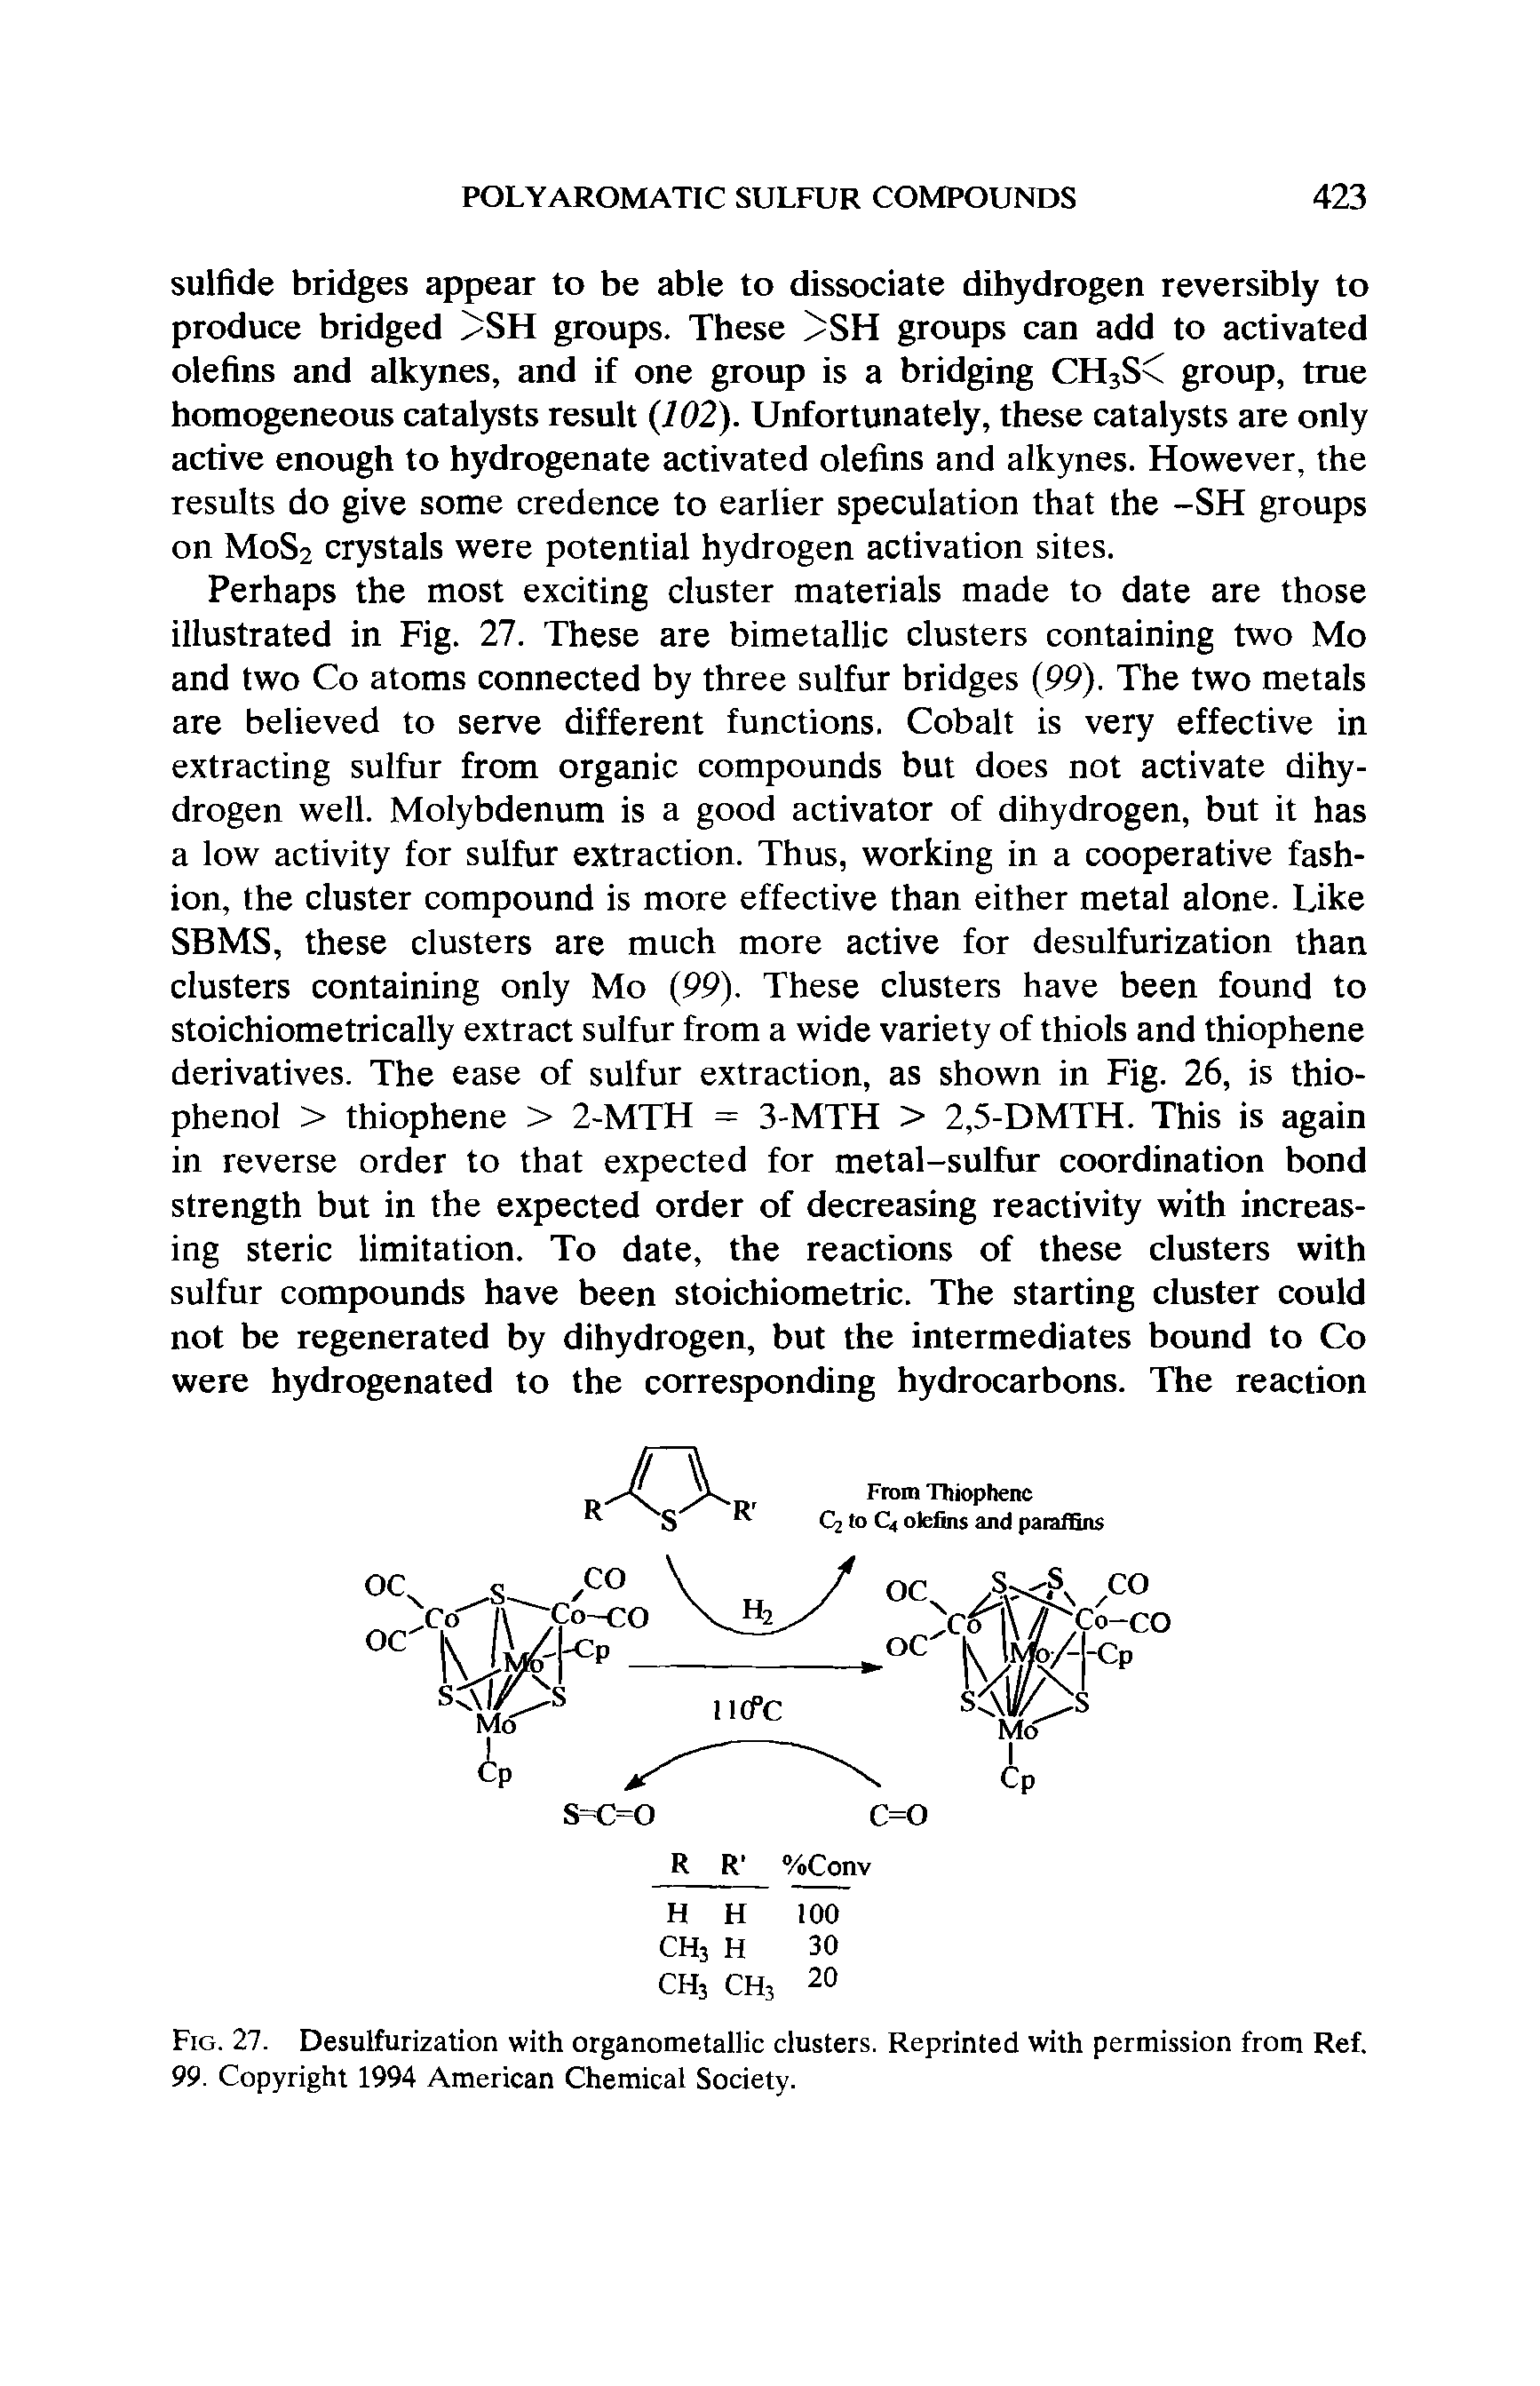 Fig. 27. Desulfurization with organometallic clusters. Reprinted with permission from Ref. 99. Copyright 1994 American Chemical Society.